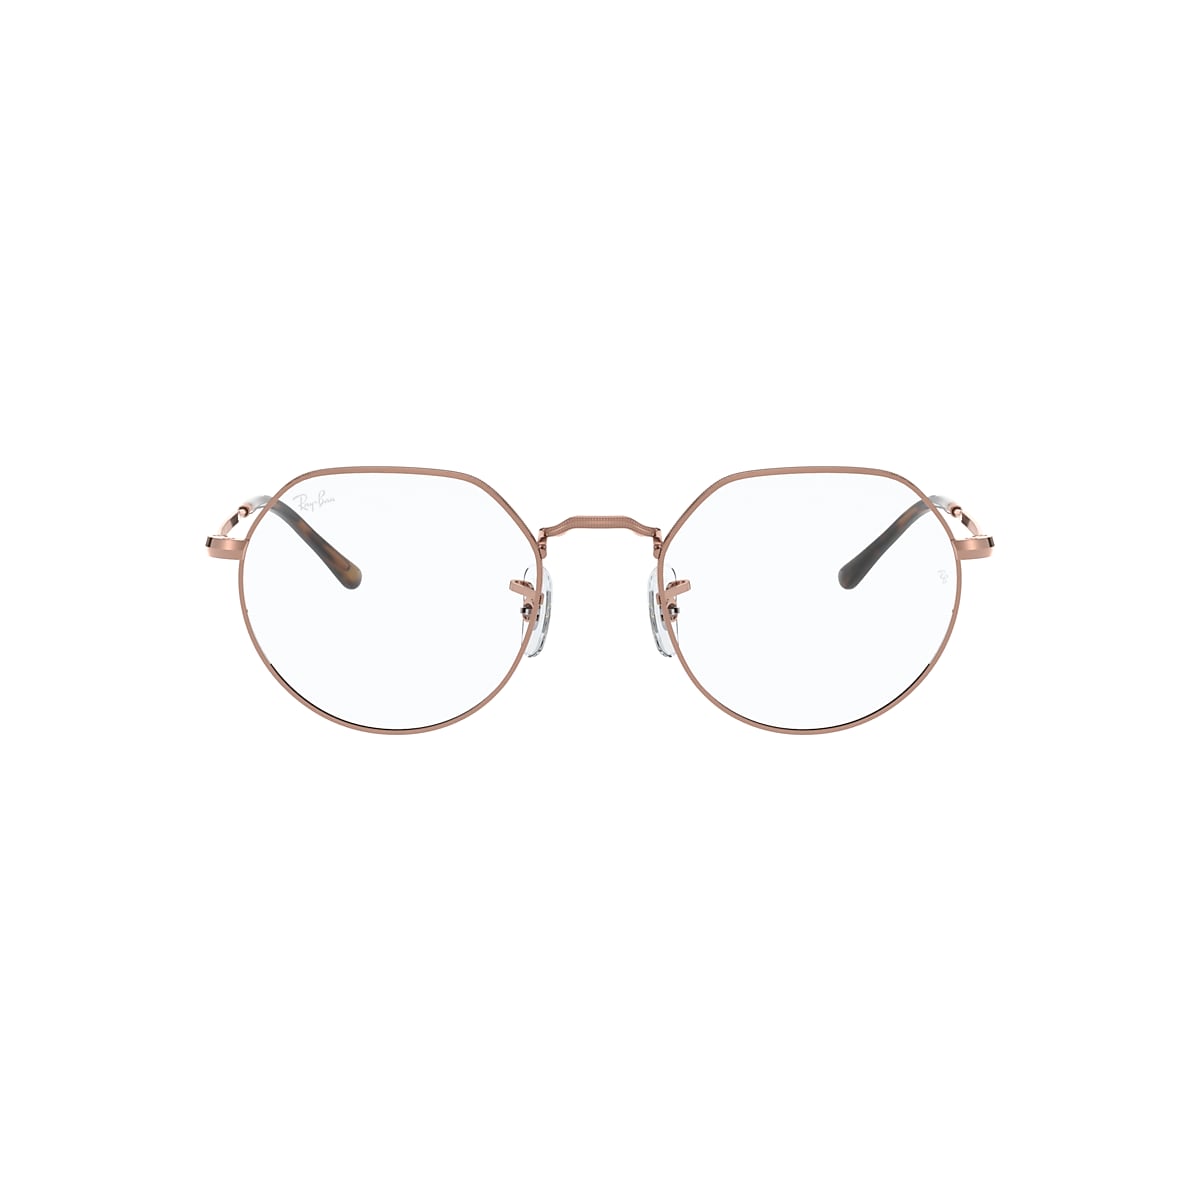 kandidaat Indringing Bij zonsopgang Ray-Ban 0RX6465 Glasses in Copper/bronze | Target Optical